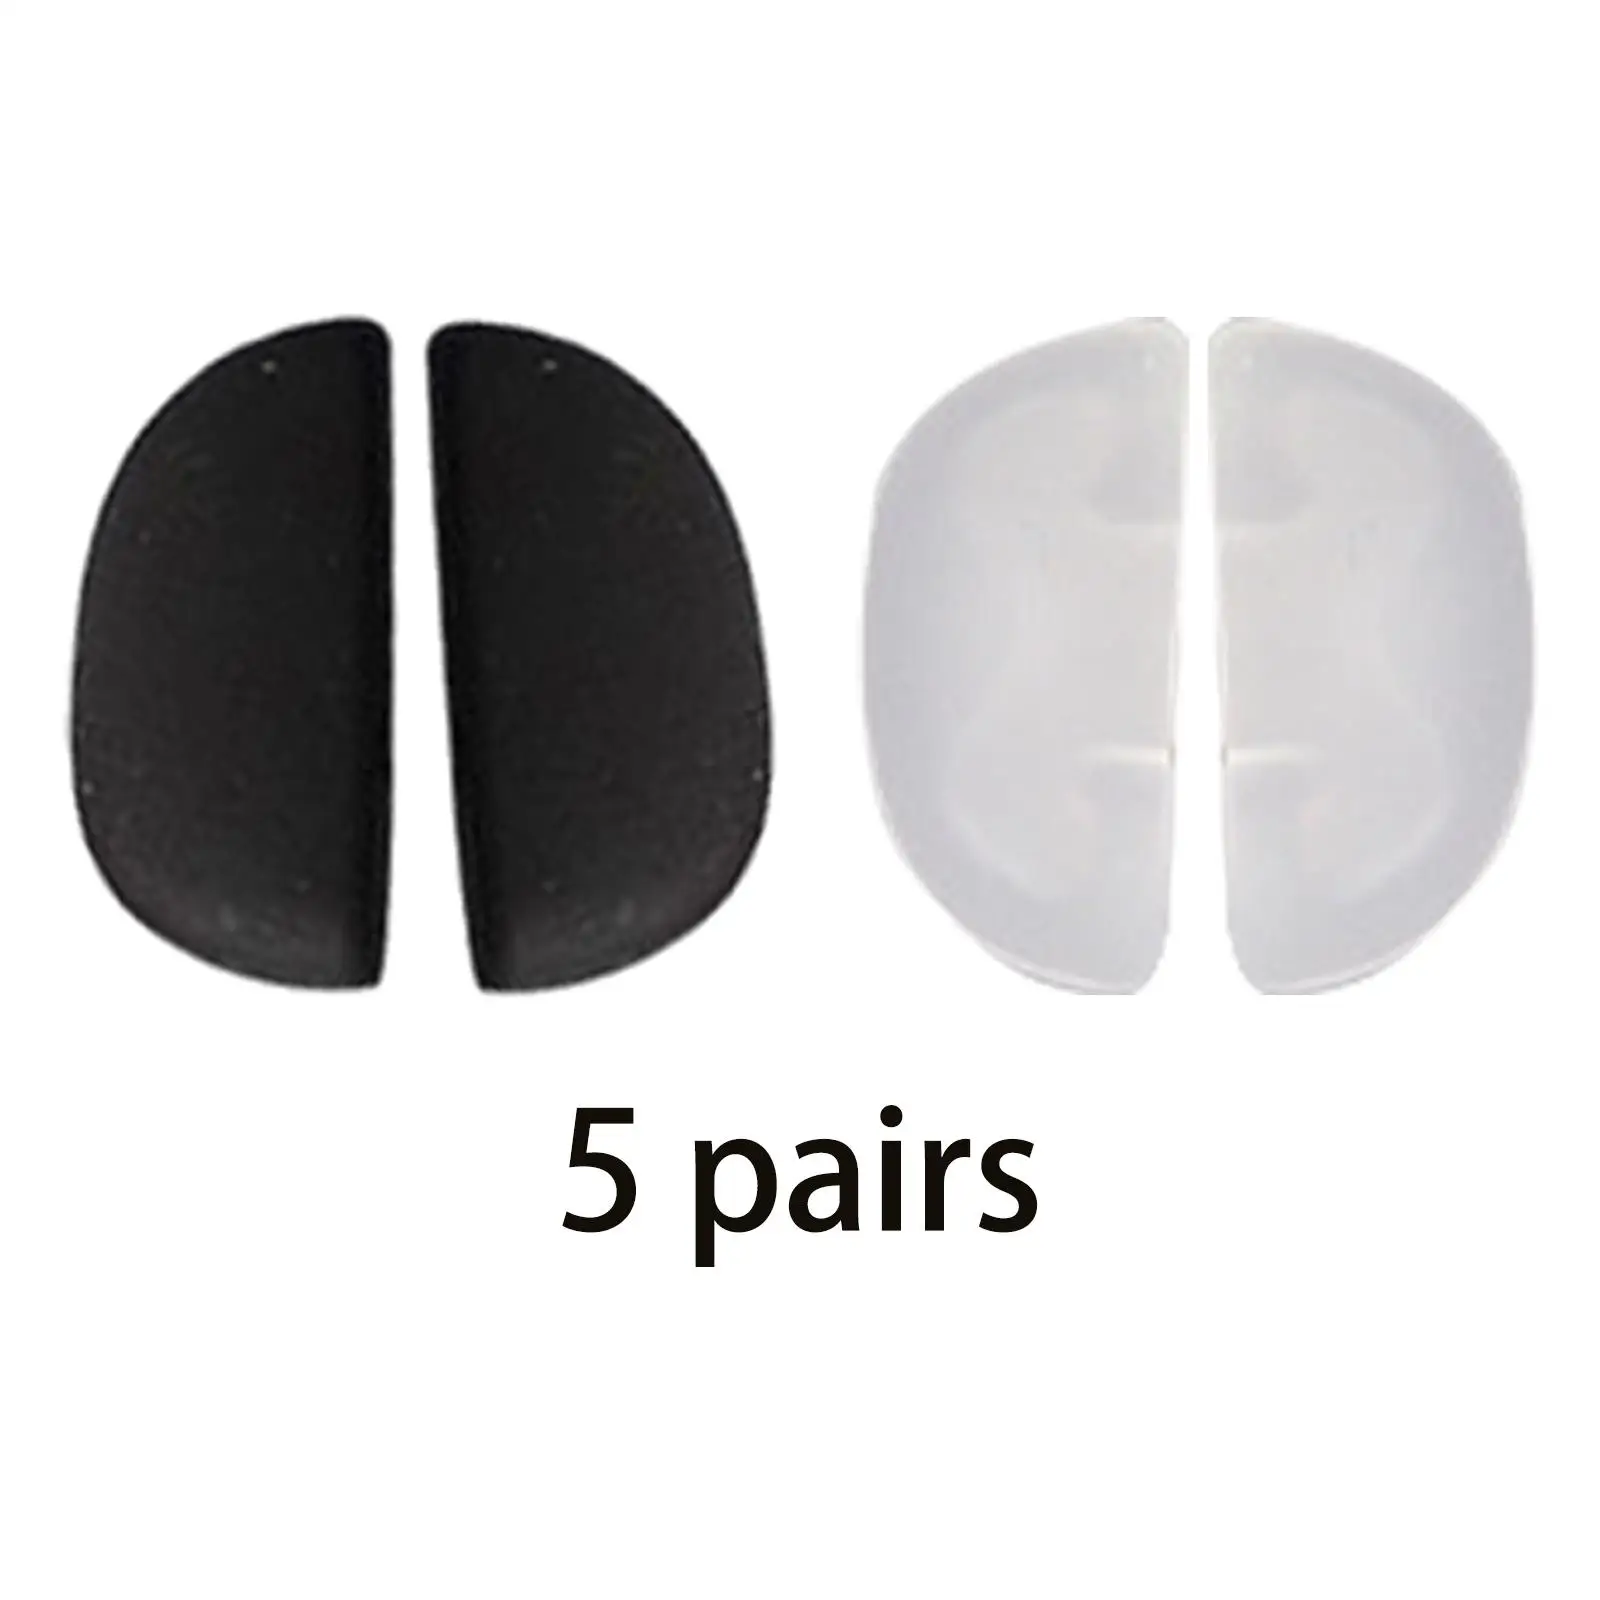 10x Children Eyeglass Nose Pads Replacement Contoured Soft for Sunglasses